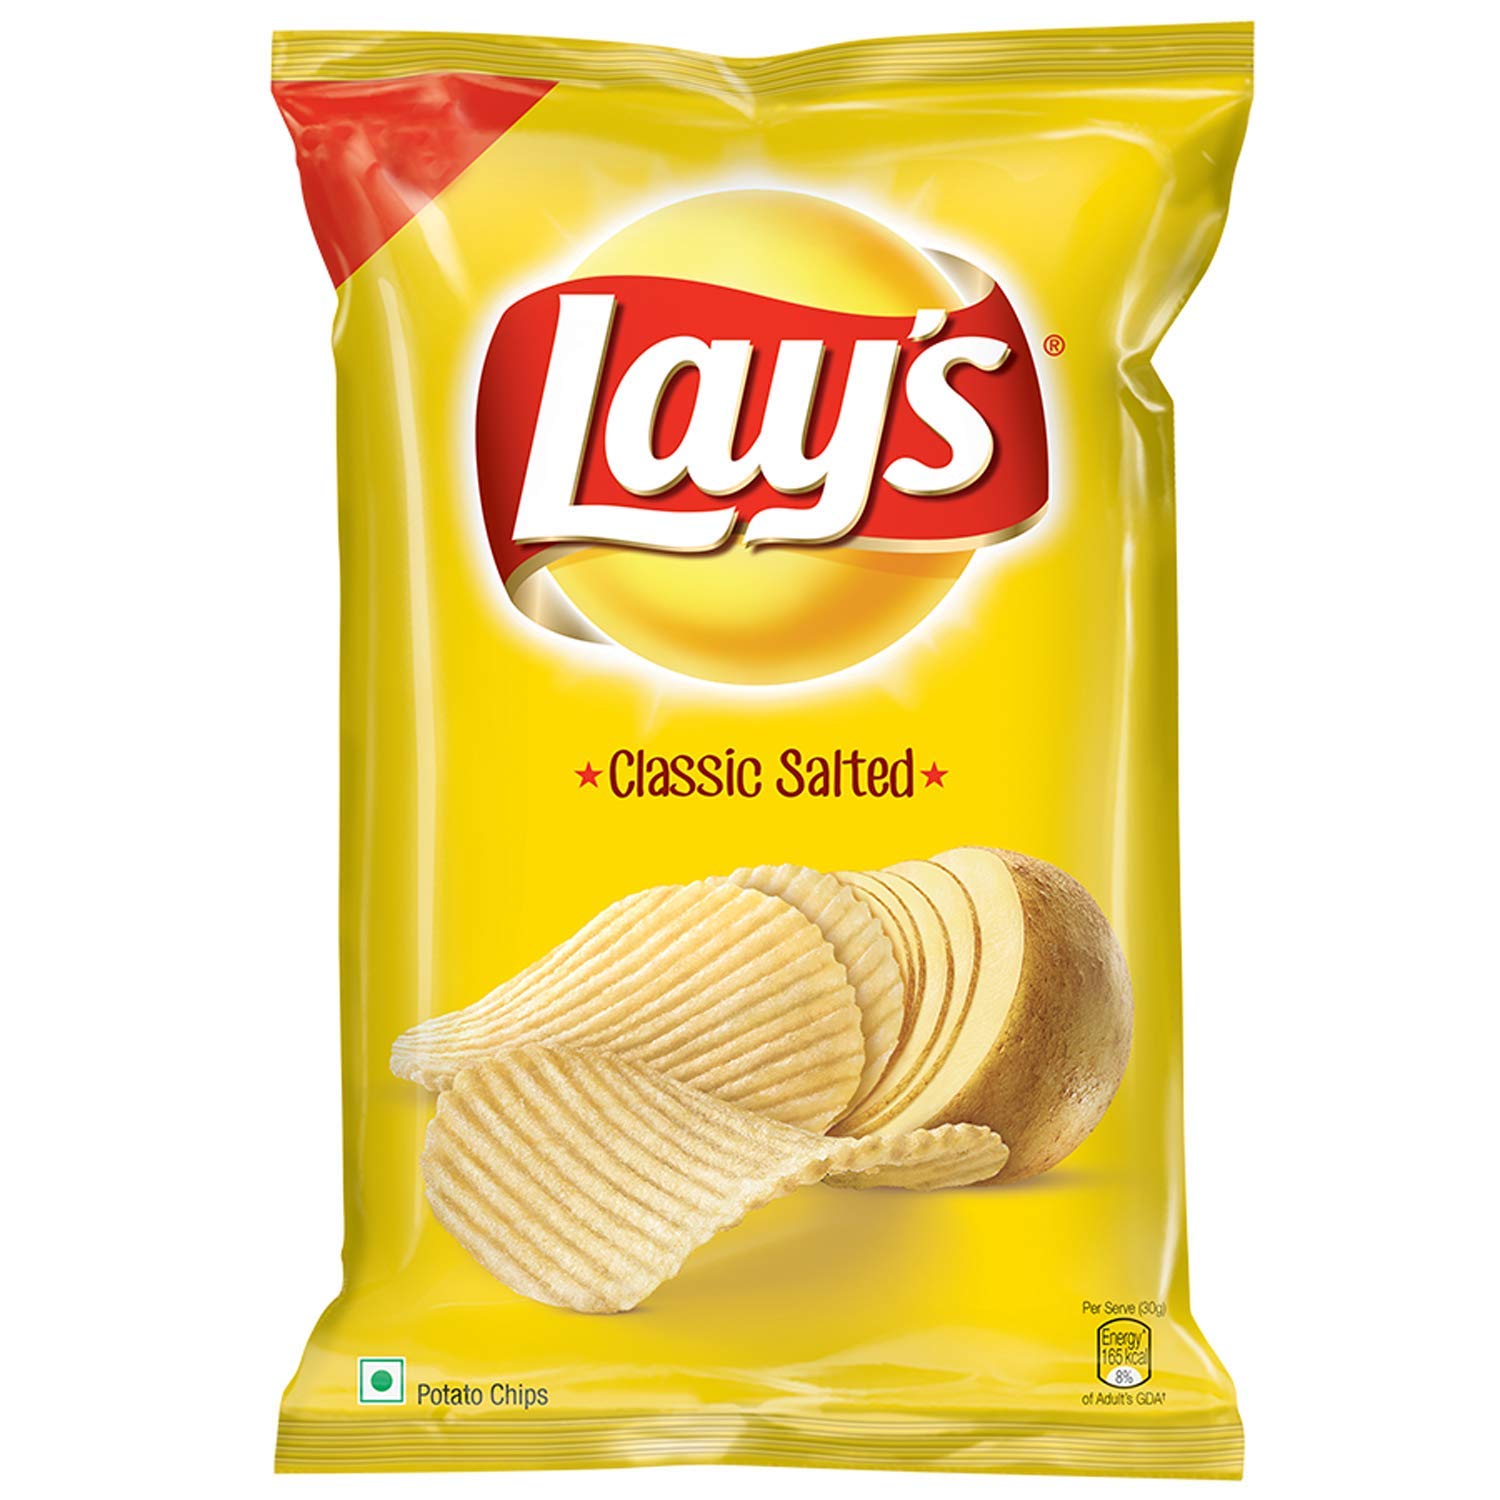 Lays Classic Salted 50gm MRP 20/-